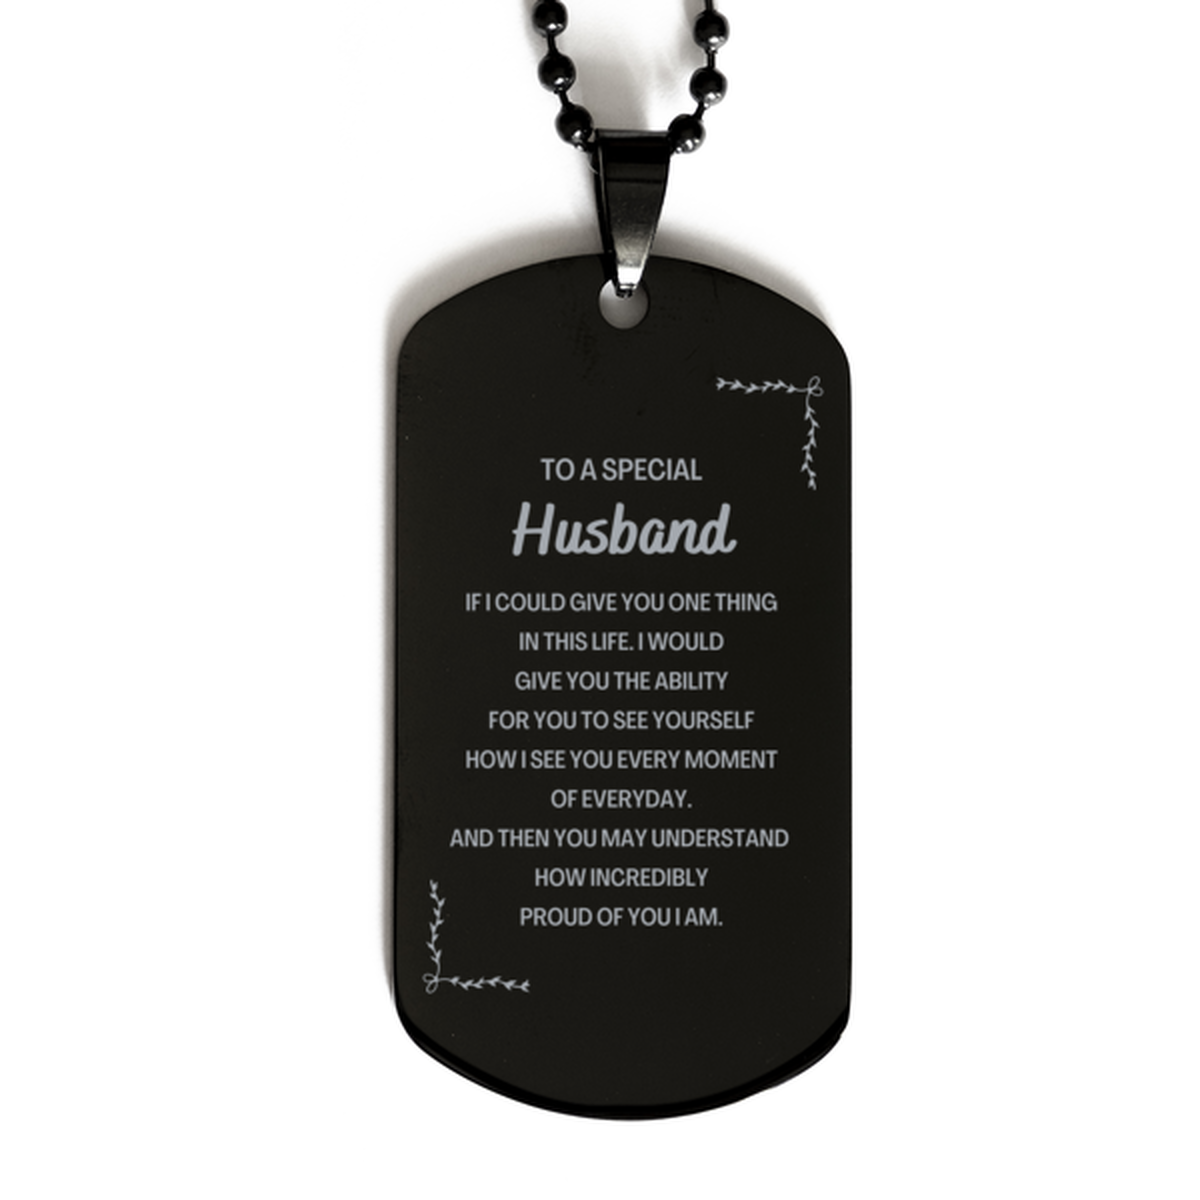 To My Husband Black Dog Tag, Gifts For Husband Engraved, Inspirational Gifts for Christmas Birthday, Epic Gifts for Husband To A Special Husband how incredibly proud of you I am